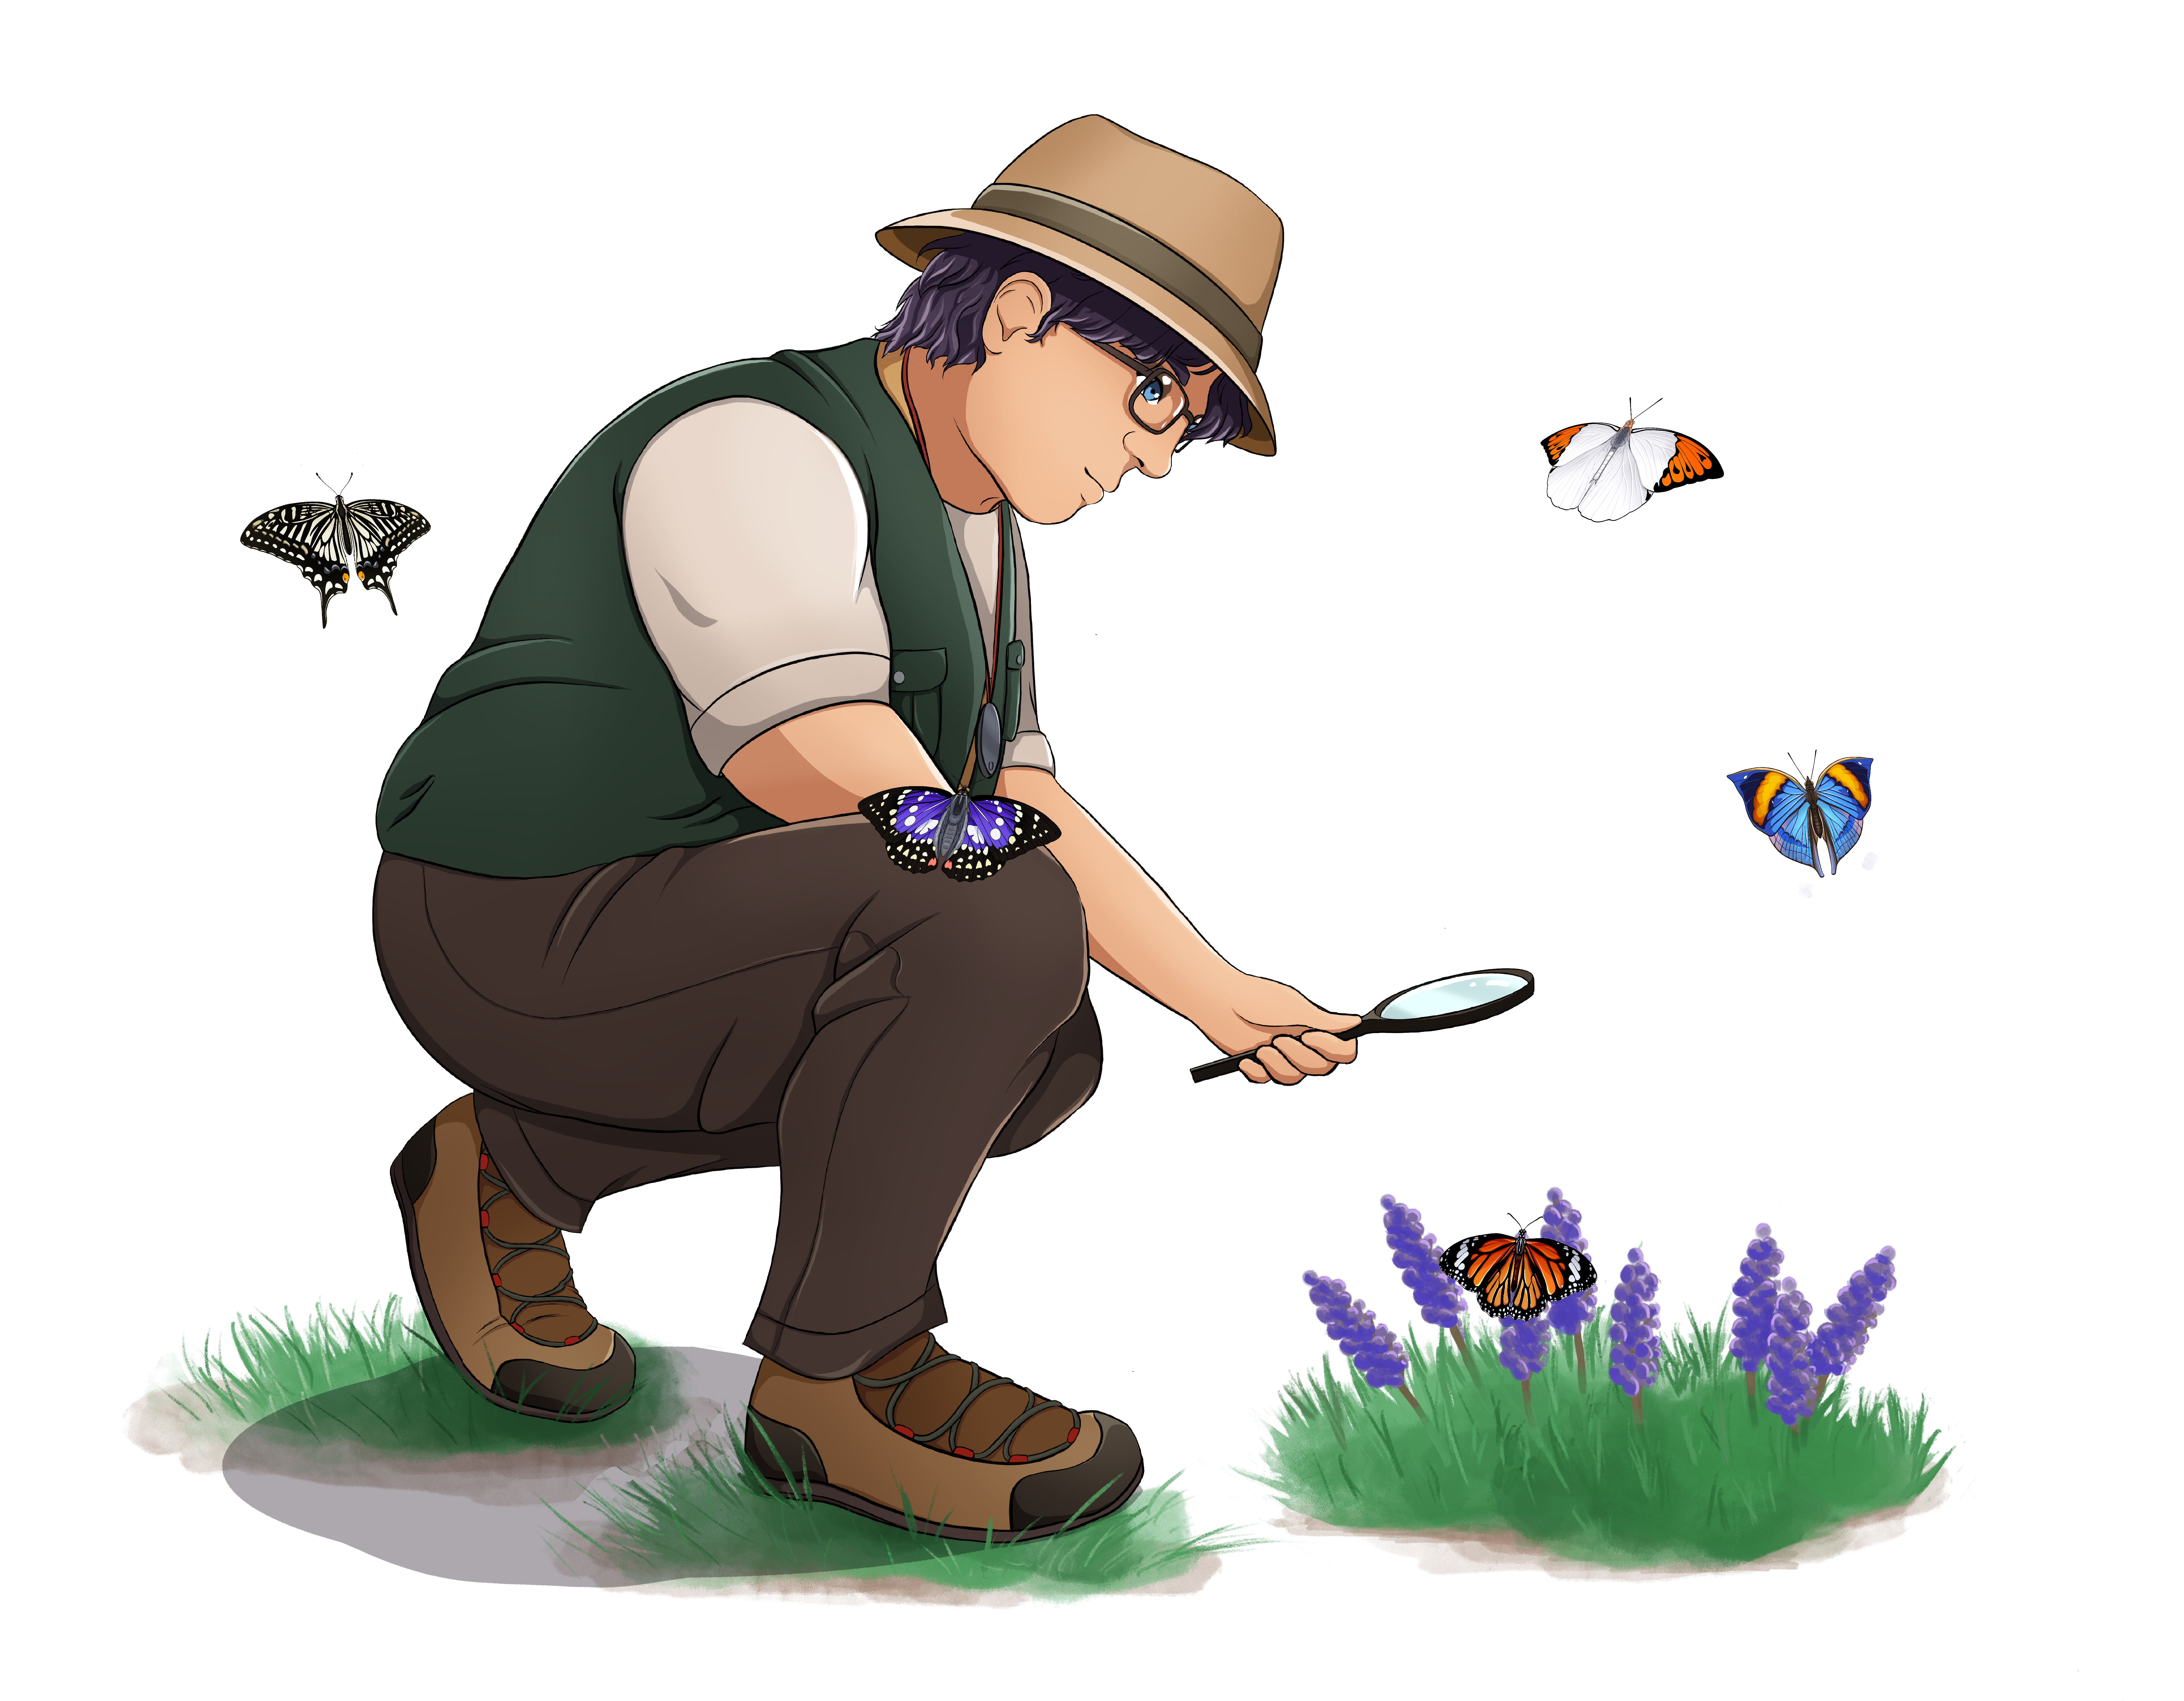 A SunnySide character named Ryozo crouching down with a magnifying glass to track bugs.